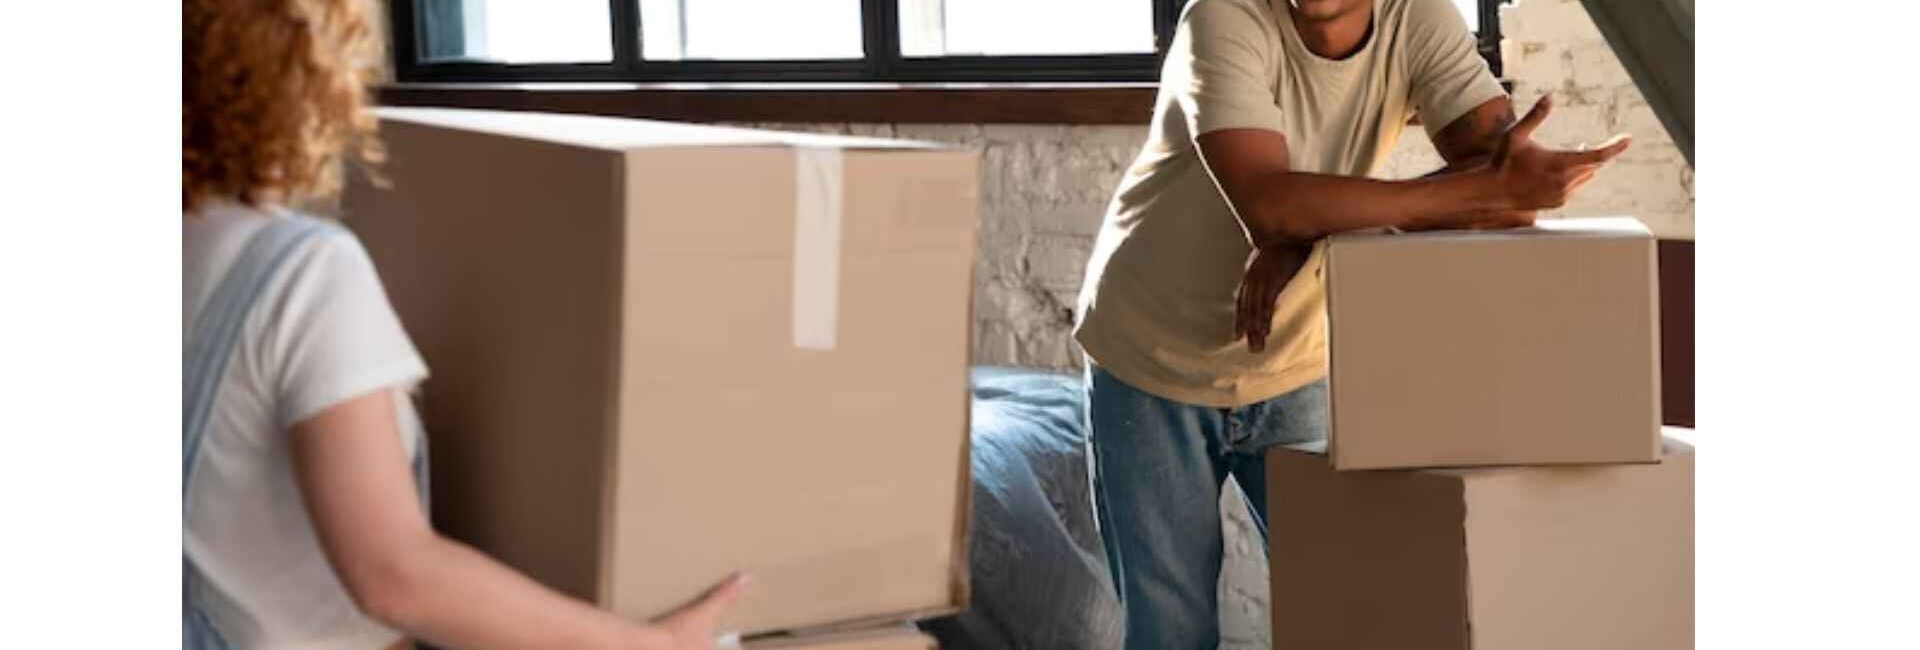 Silver Packers and Movers - Best Packers and Movers in Noida